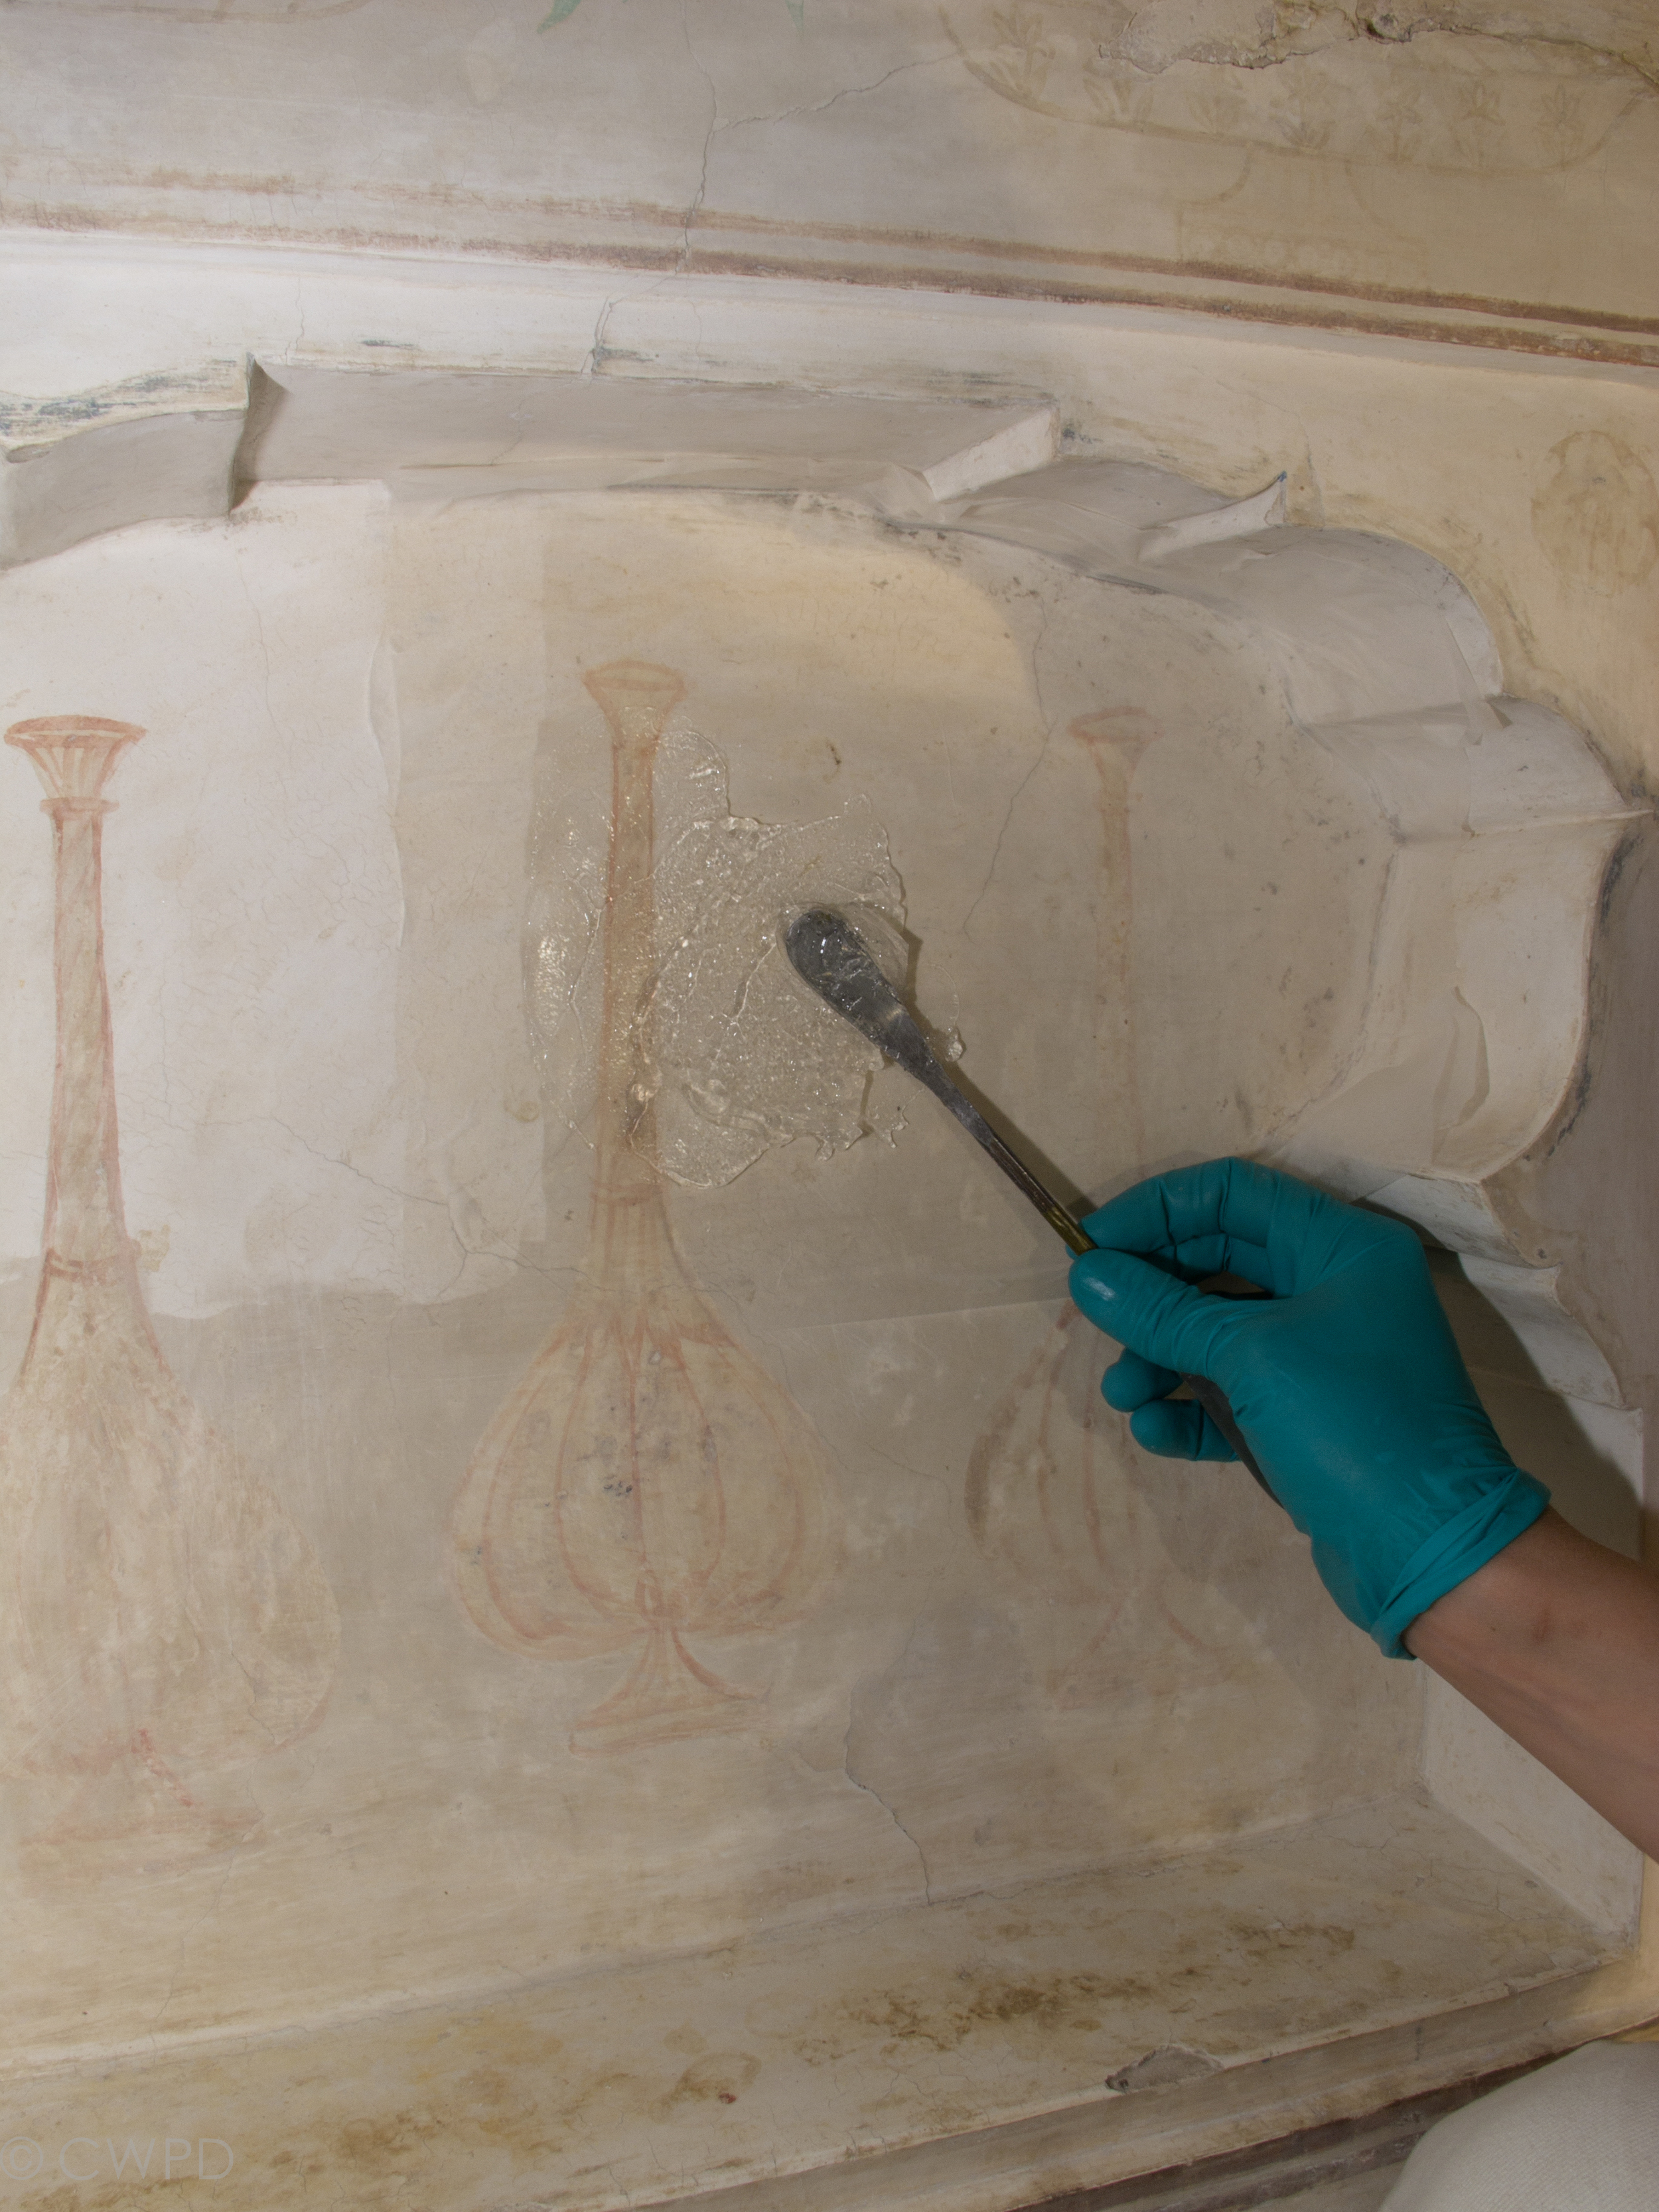  A gel-based system was applied over the tissue layer until the dirt layer beneath began to swell.&nbsp;  Image © Courtauld CWPD 